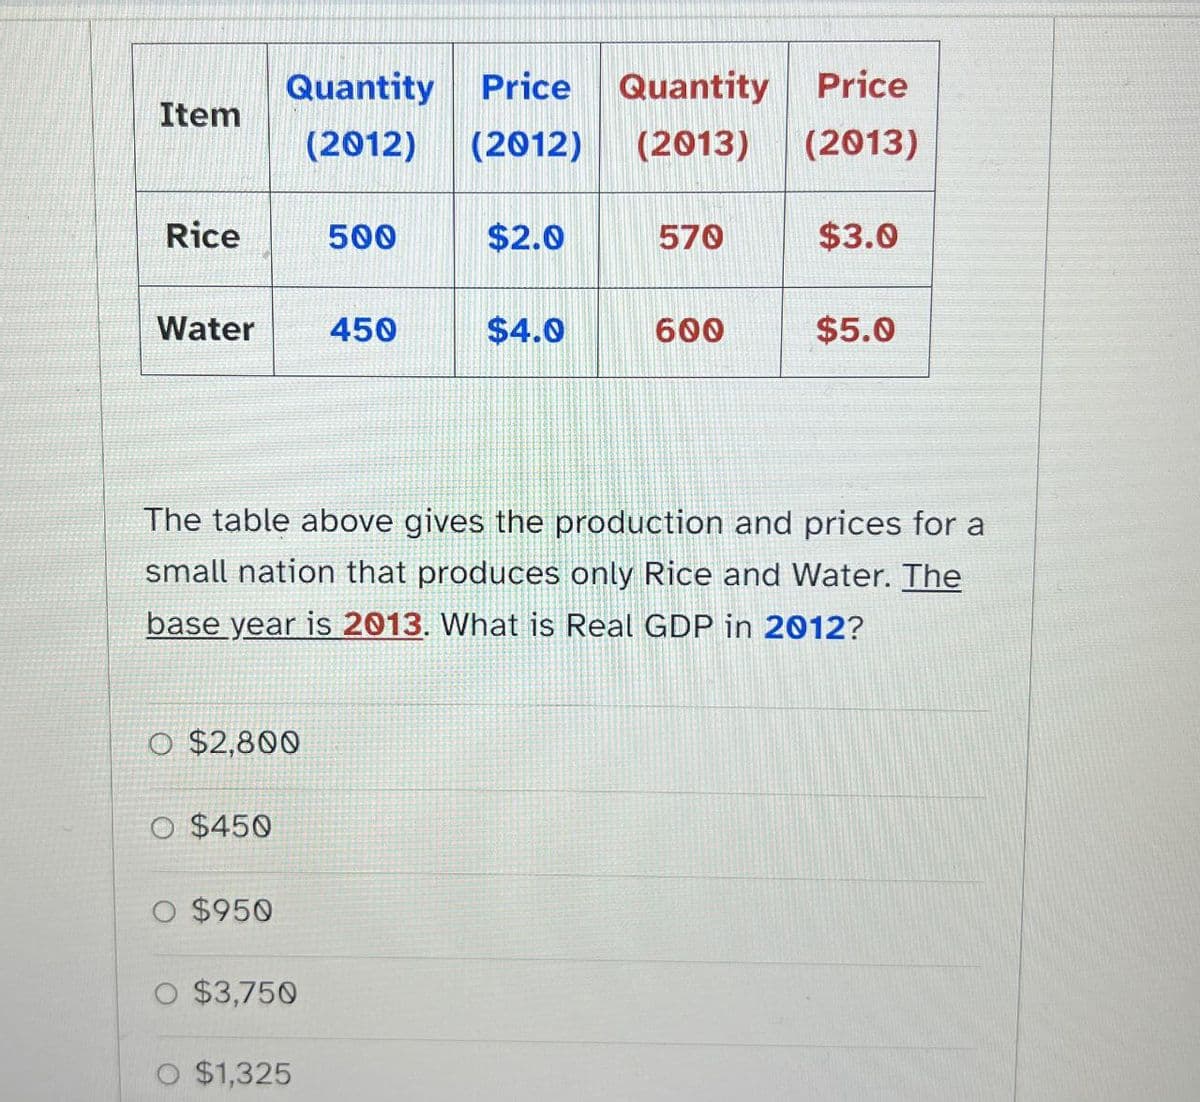 Quantity Price
Quantity Price
Item
(2012) (2012) (2013) (2013)
Rice
500
$2.0
570
$3.0
Water
450
$4.0
600
$5.0
The table above gives the production and prices for a
small nation that produces only Rice and Water. The
base year is 2013. What is Real GDP in 2012?
O $2,800
O $450
O $950
O $3,750
O $1,325